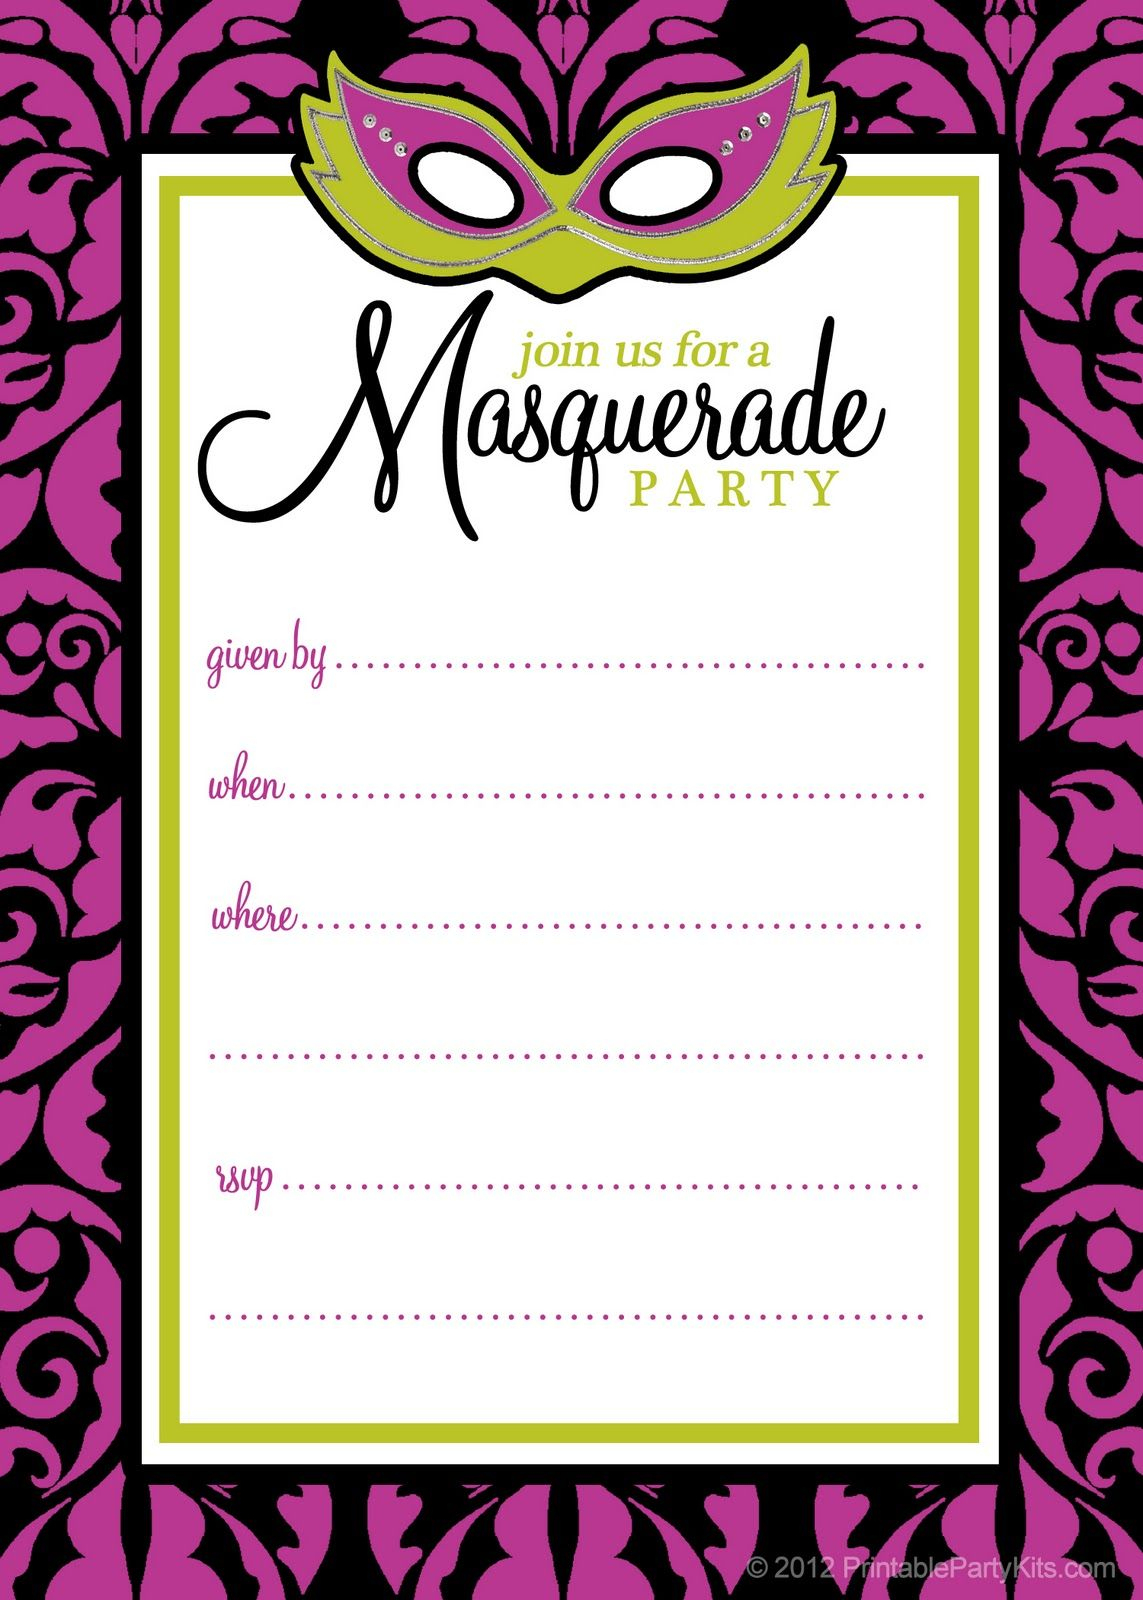 Free Printable Party Invitations: Masquerade Or Mardi Gras Party - Free Printable Mardi Gras Invitations